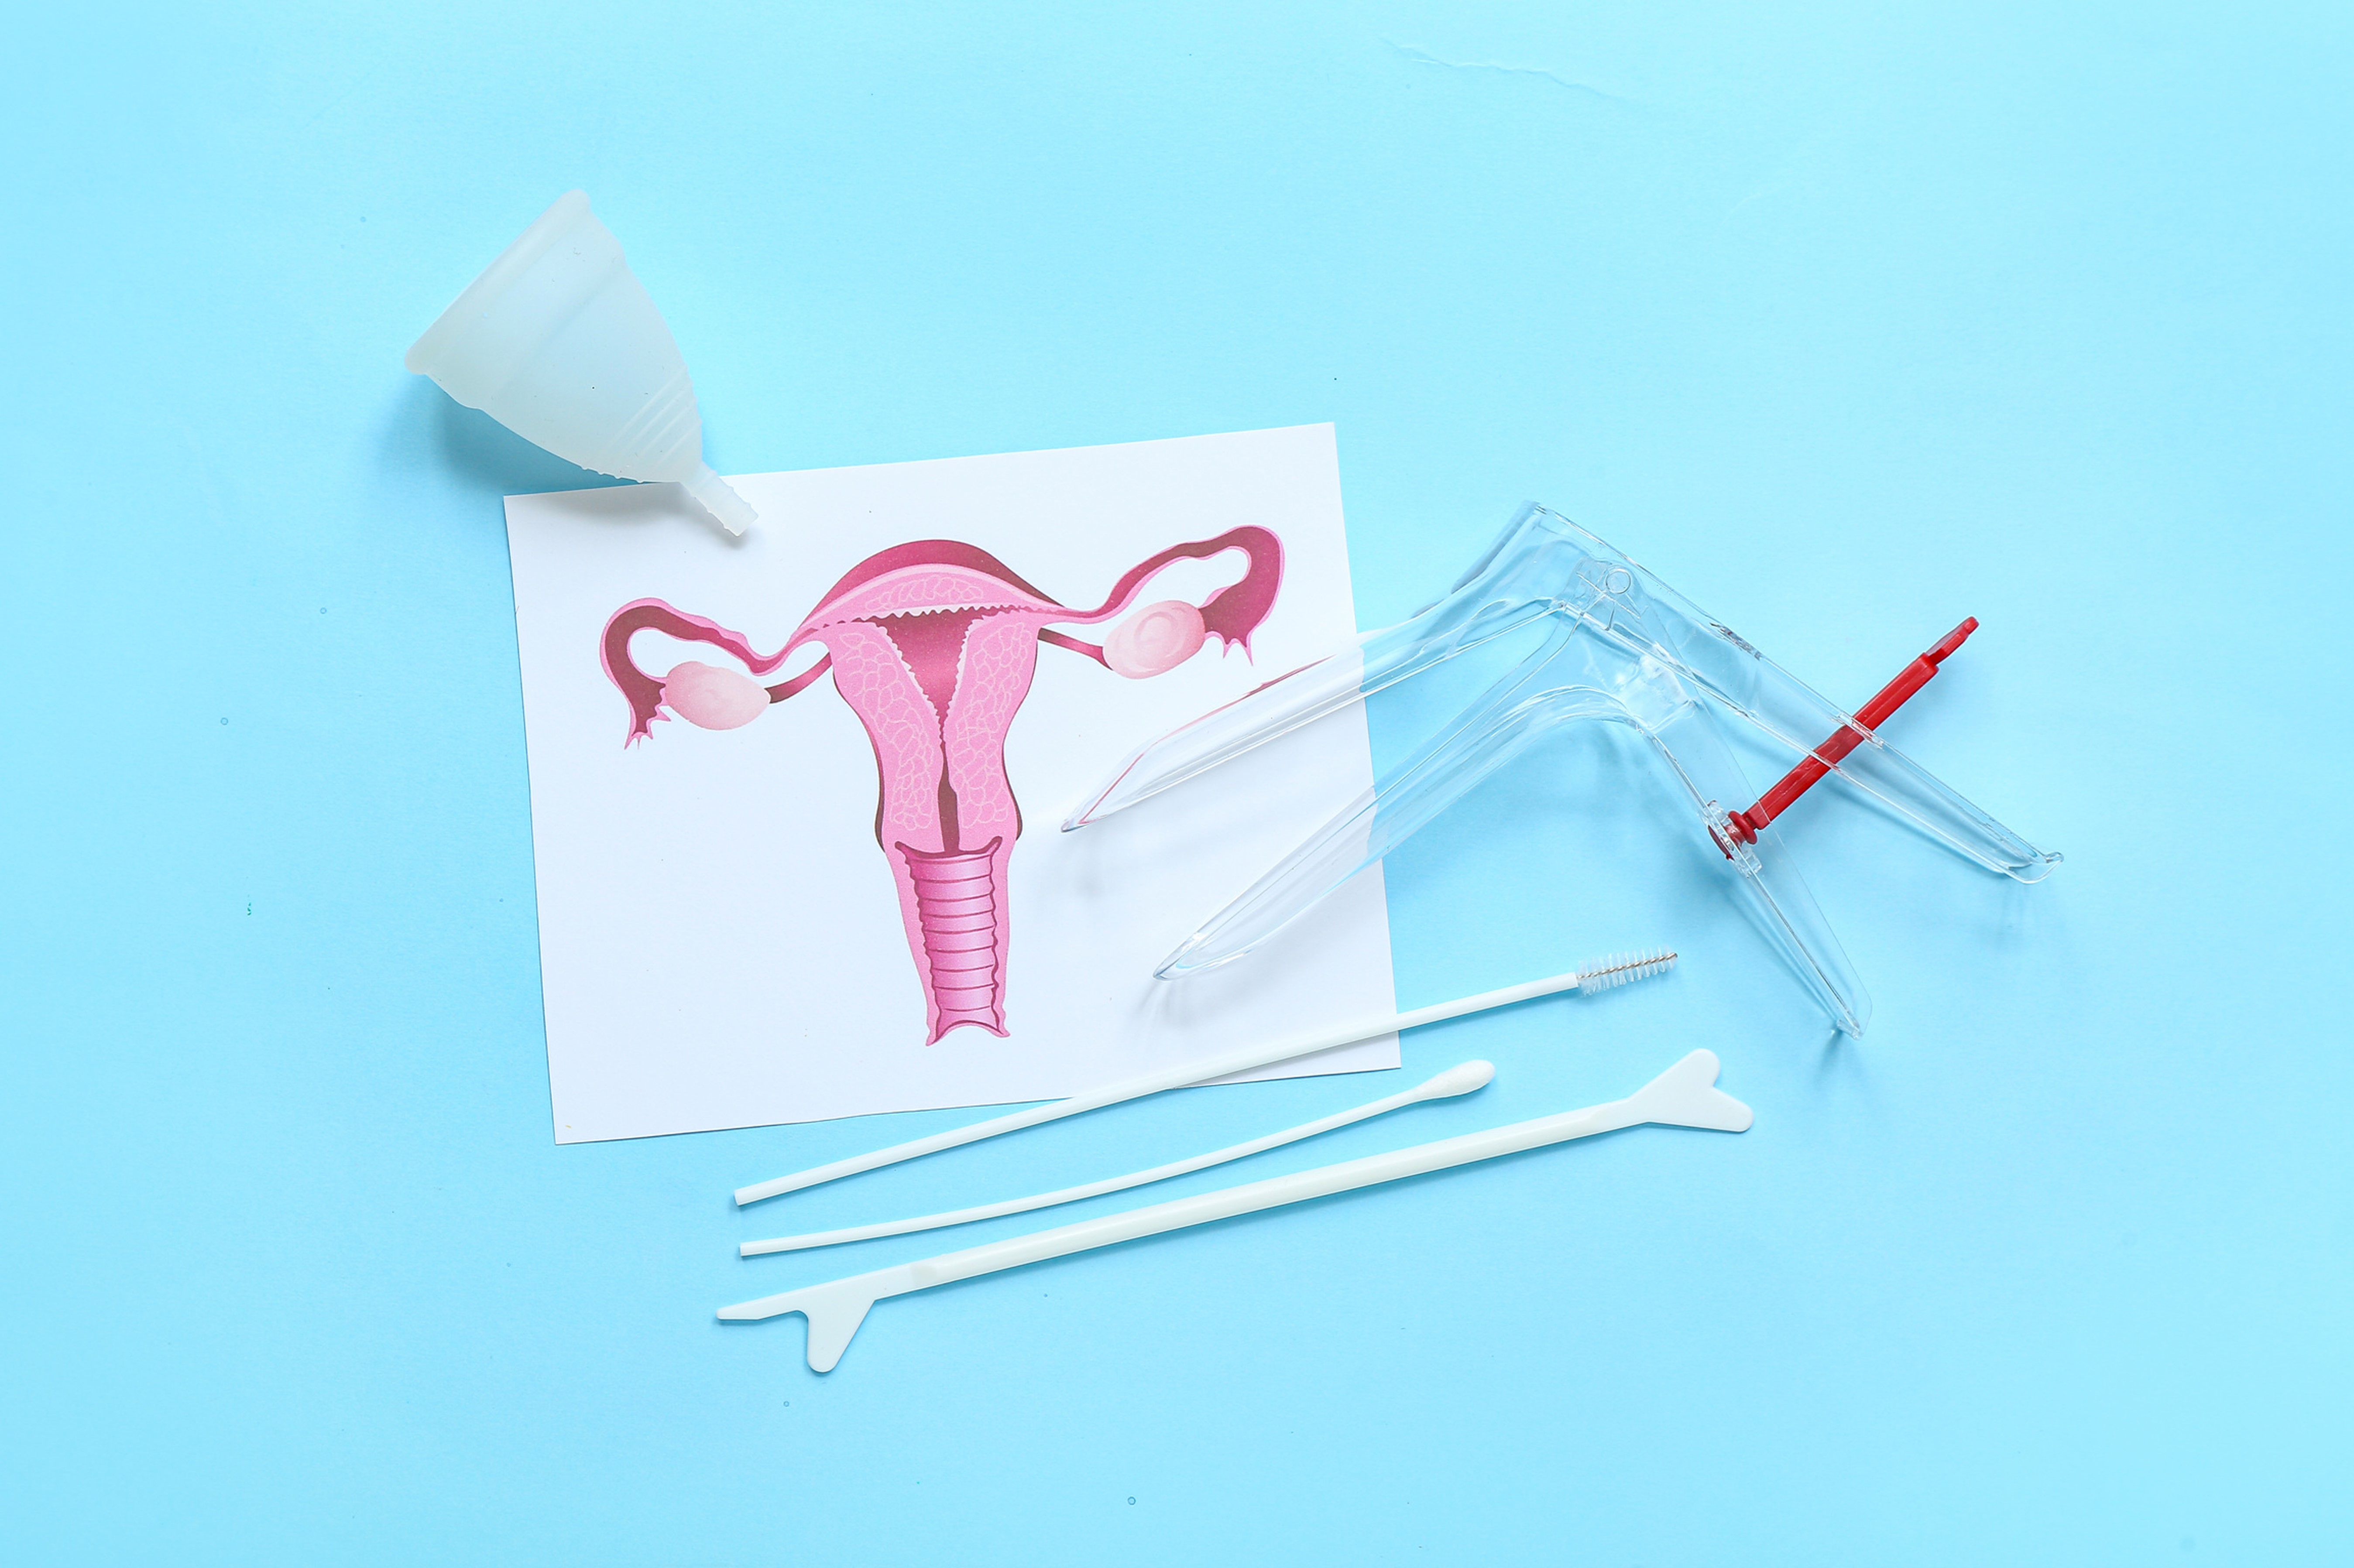 Photo of a uterus diagram, speculum, vaginal swabs and a menstrual cup on a blue background